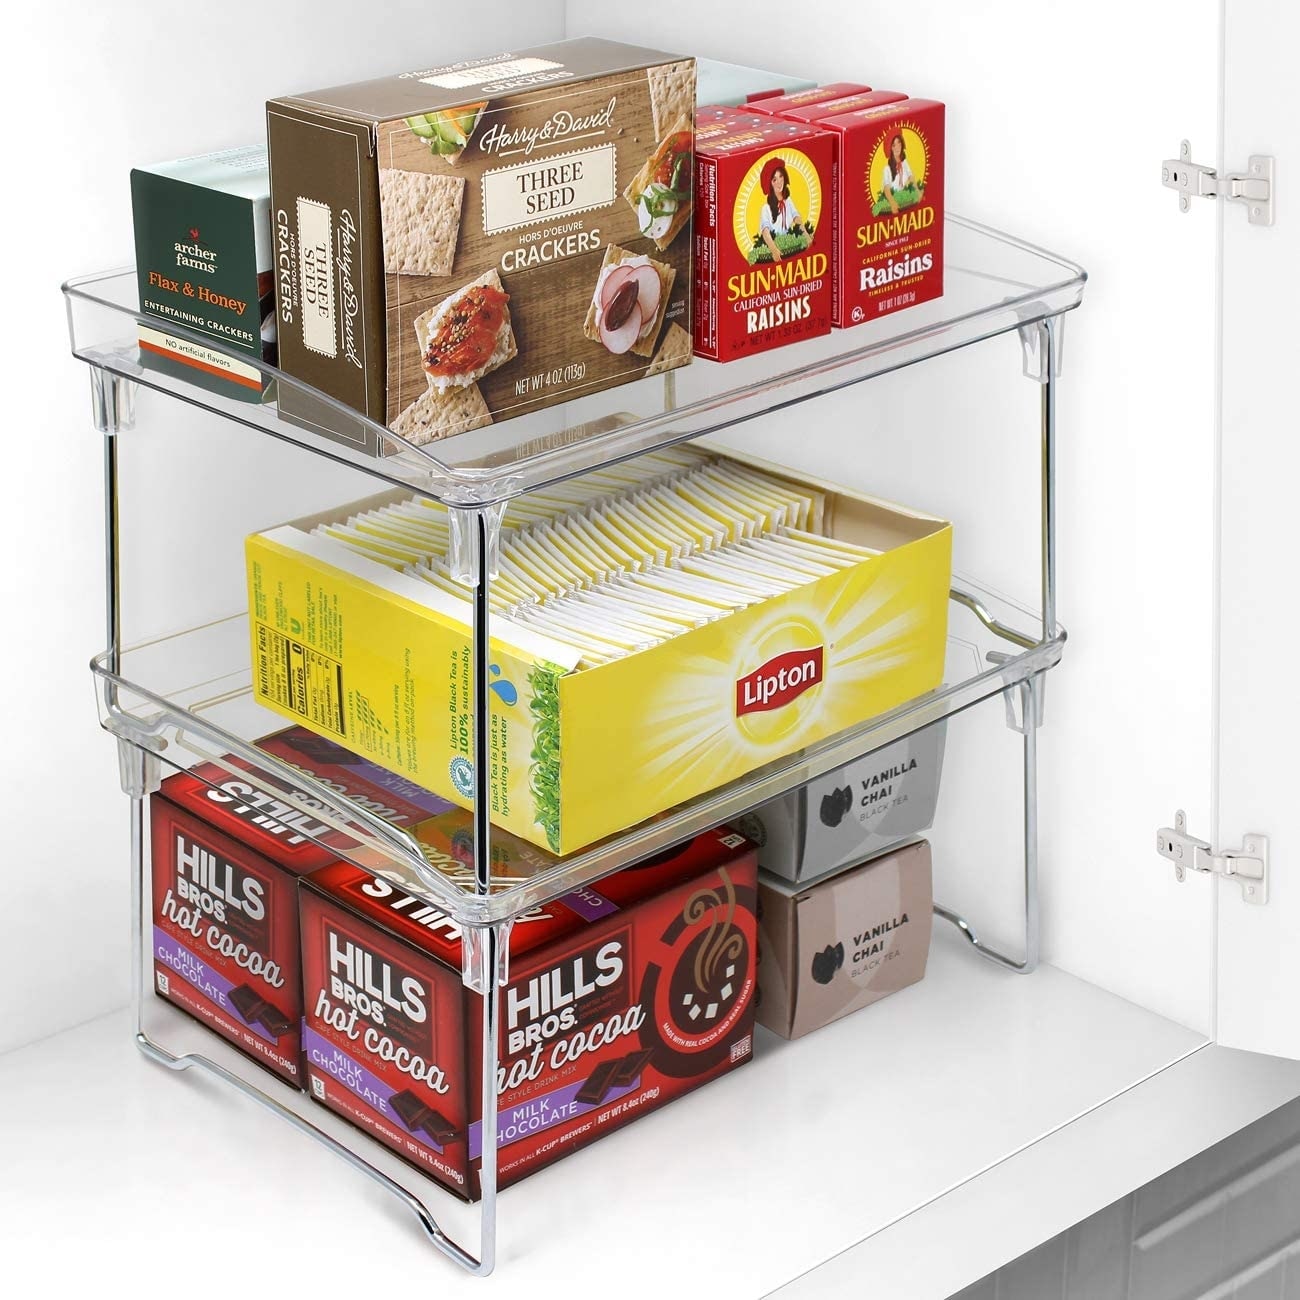 2-Tier Stackable Storage Shelf Stand- Foldable Organizer Rack for Kitchen  Pantry - On Sale - Bed Bath & Beyond - 35453162